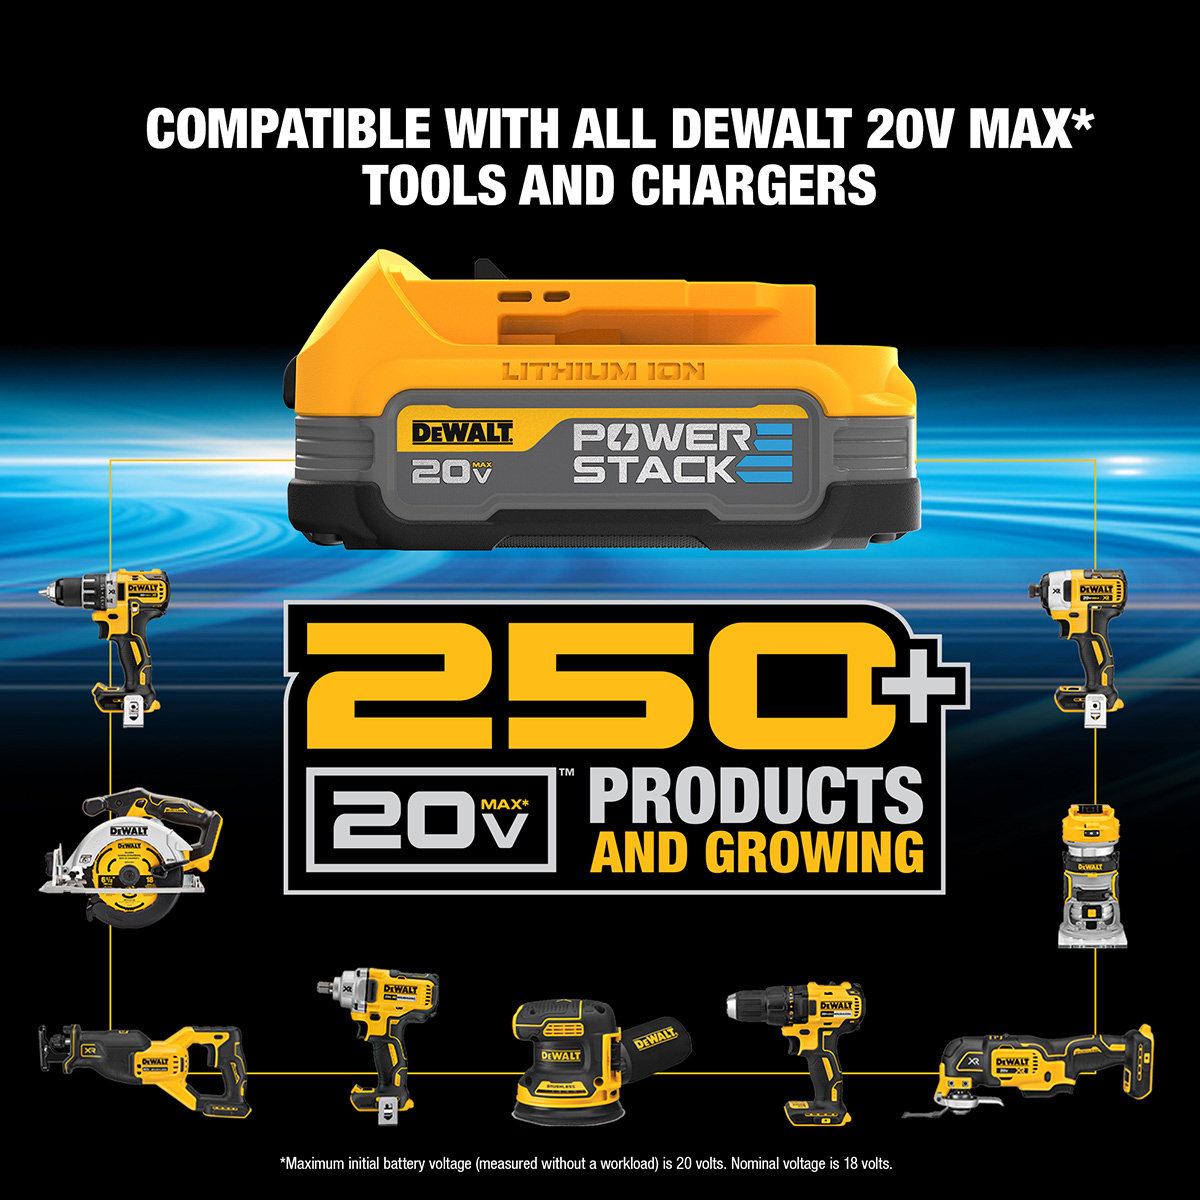 Compatible with all DEWALT 20V MAX* Tools and Chargers